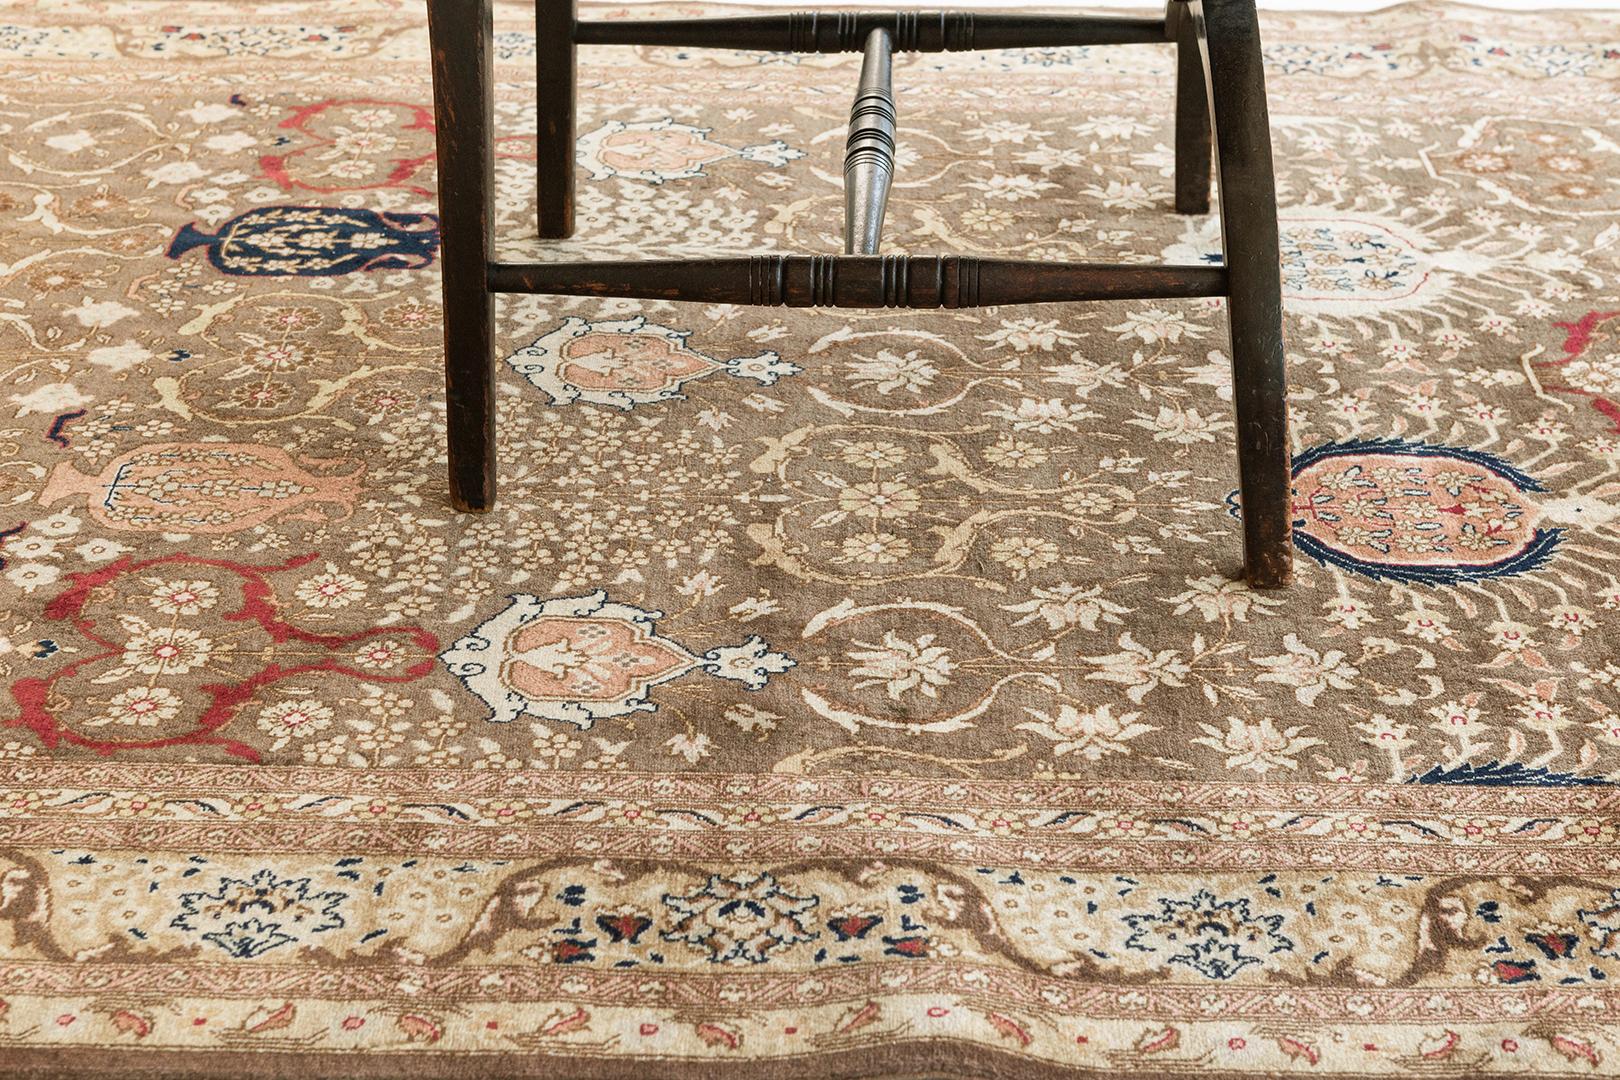 A dynamic and vintage in every way, this genuine Persian antique rug is perfect for a whole host of applications. Ideally, it will make any hallway into the focal point of the home. A series of motifs and symbols added a luxury vibe and